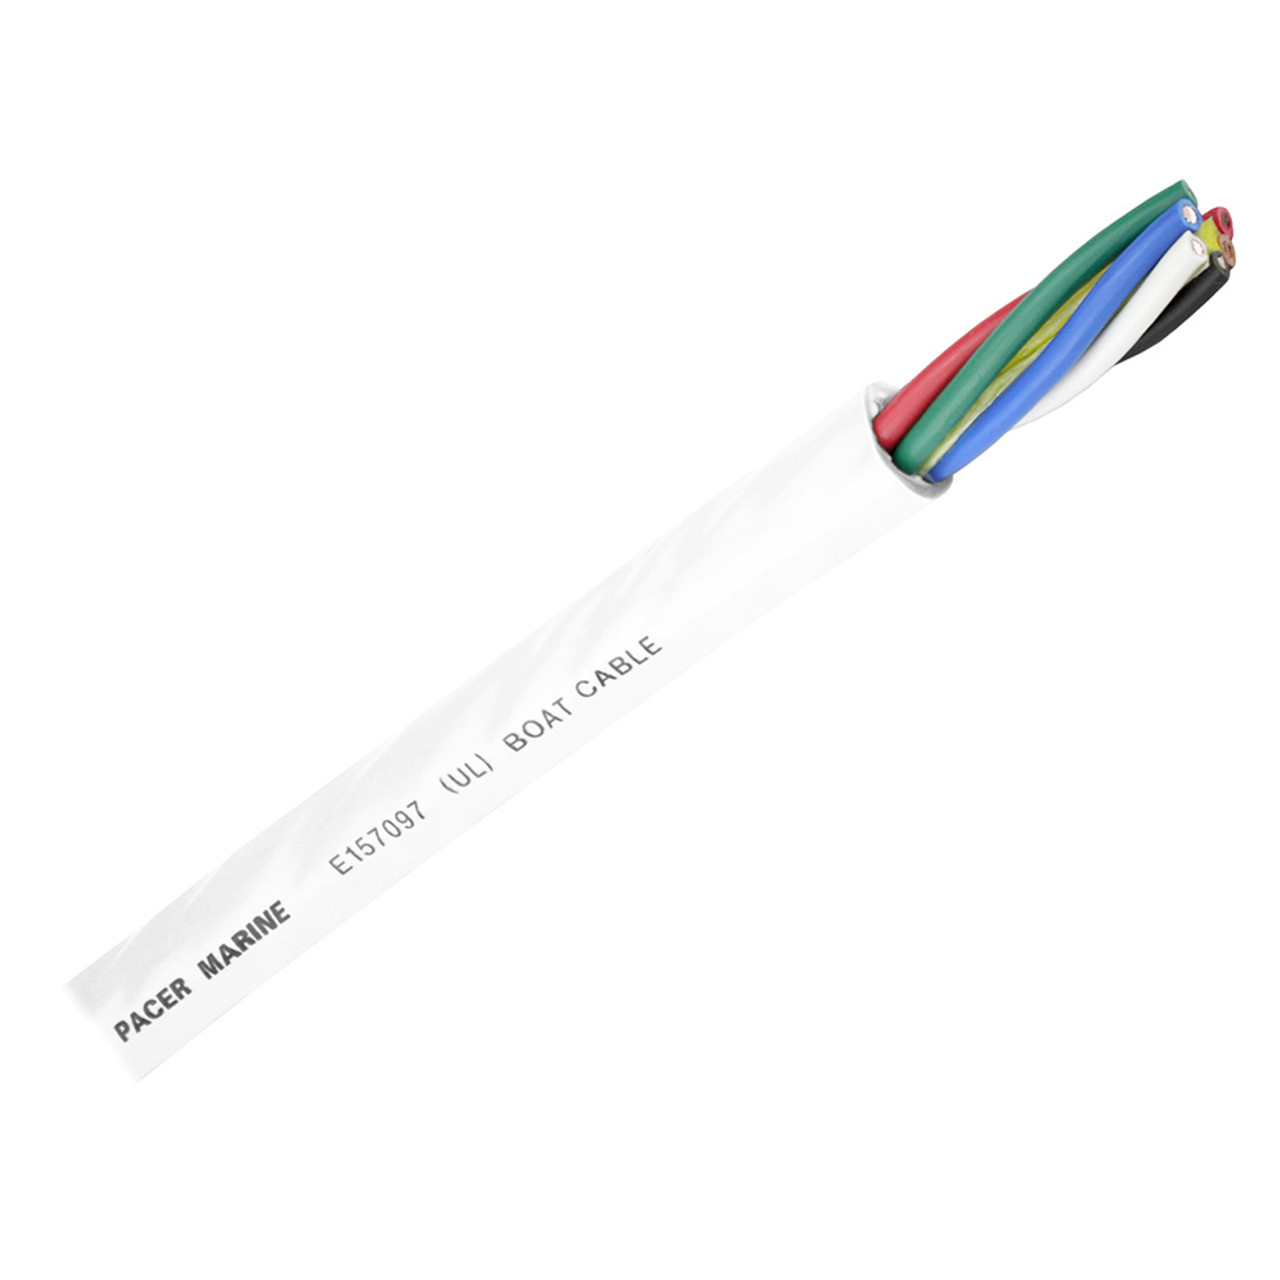 Pacer Round 6 Conductor Cable - 250 - 16\/6 AWG - Black, Brown, Red, Green, Blue  White [WR16\/6-250]